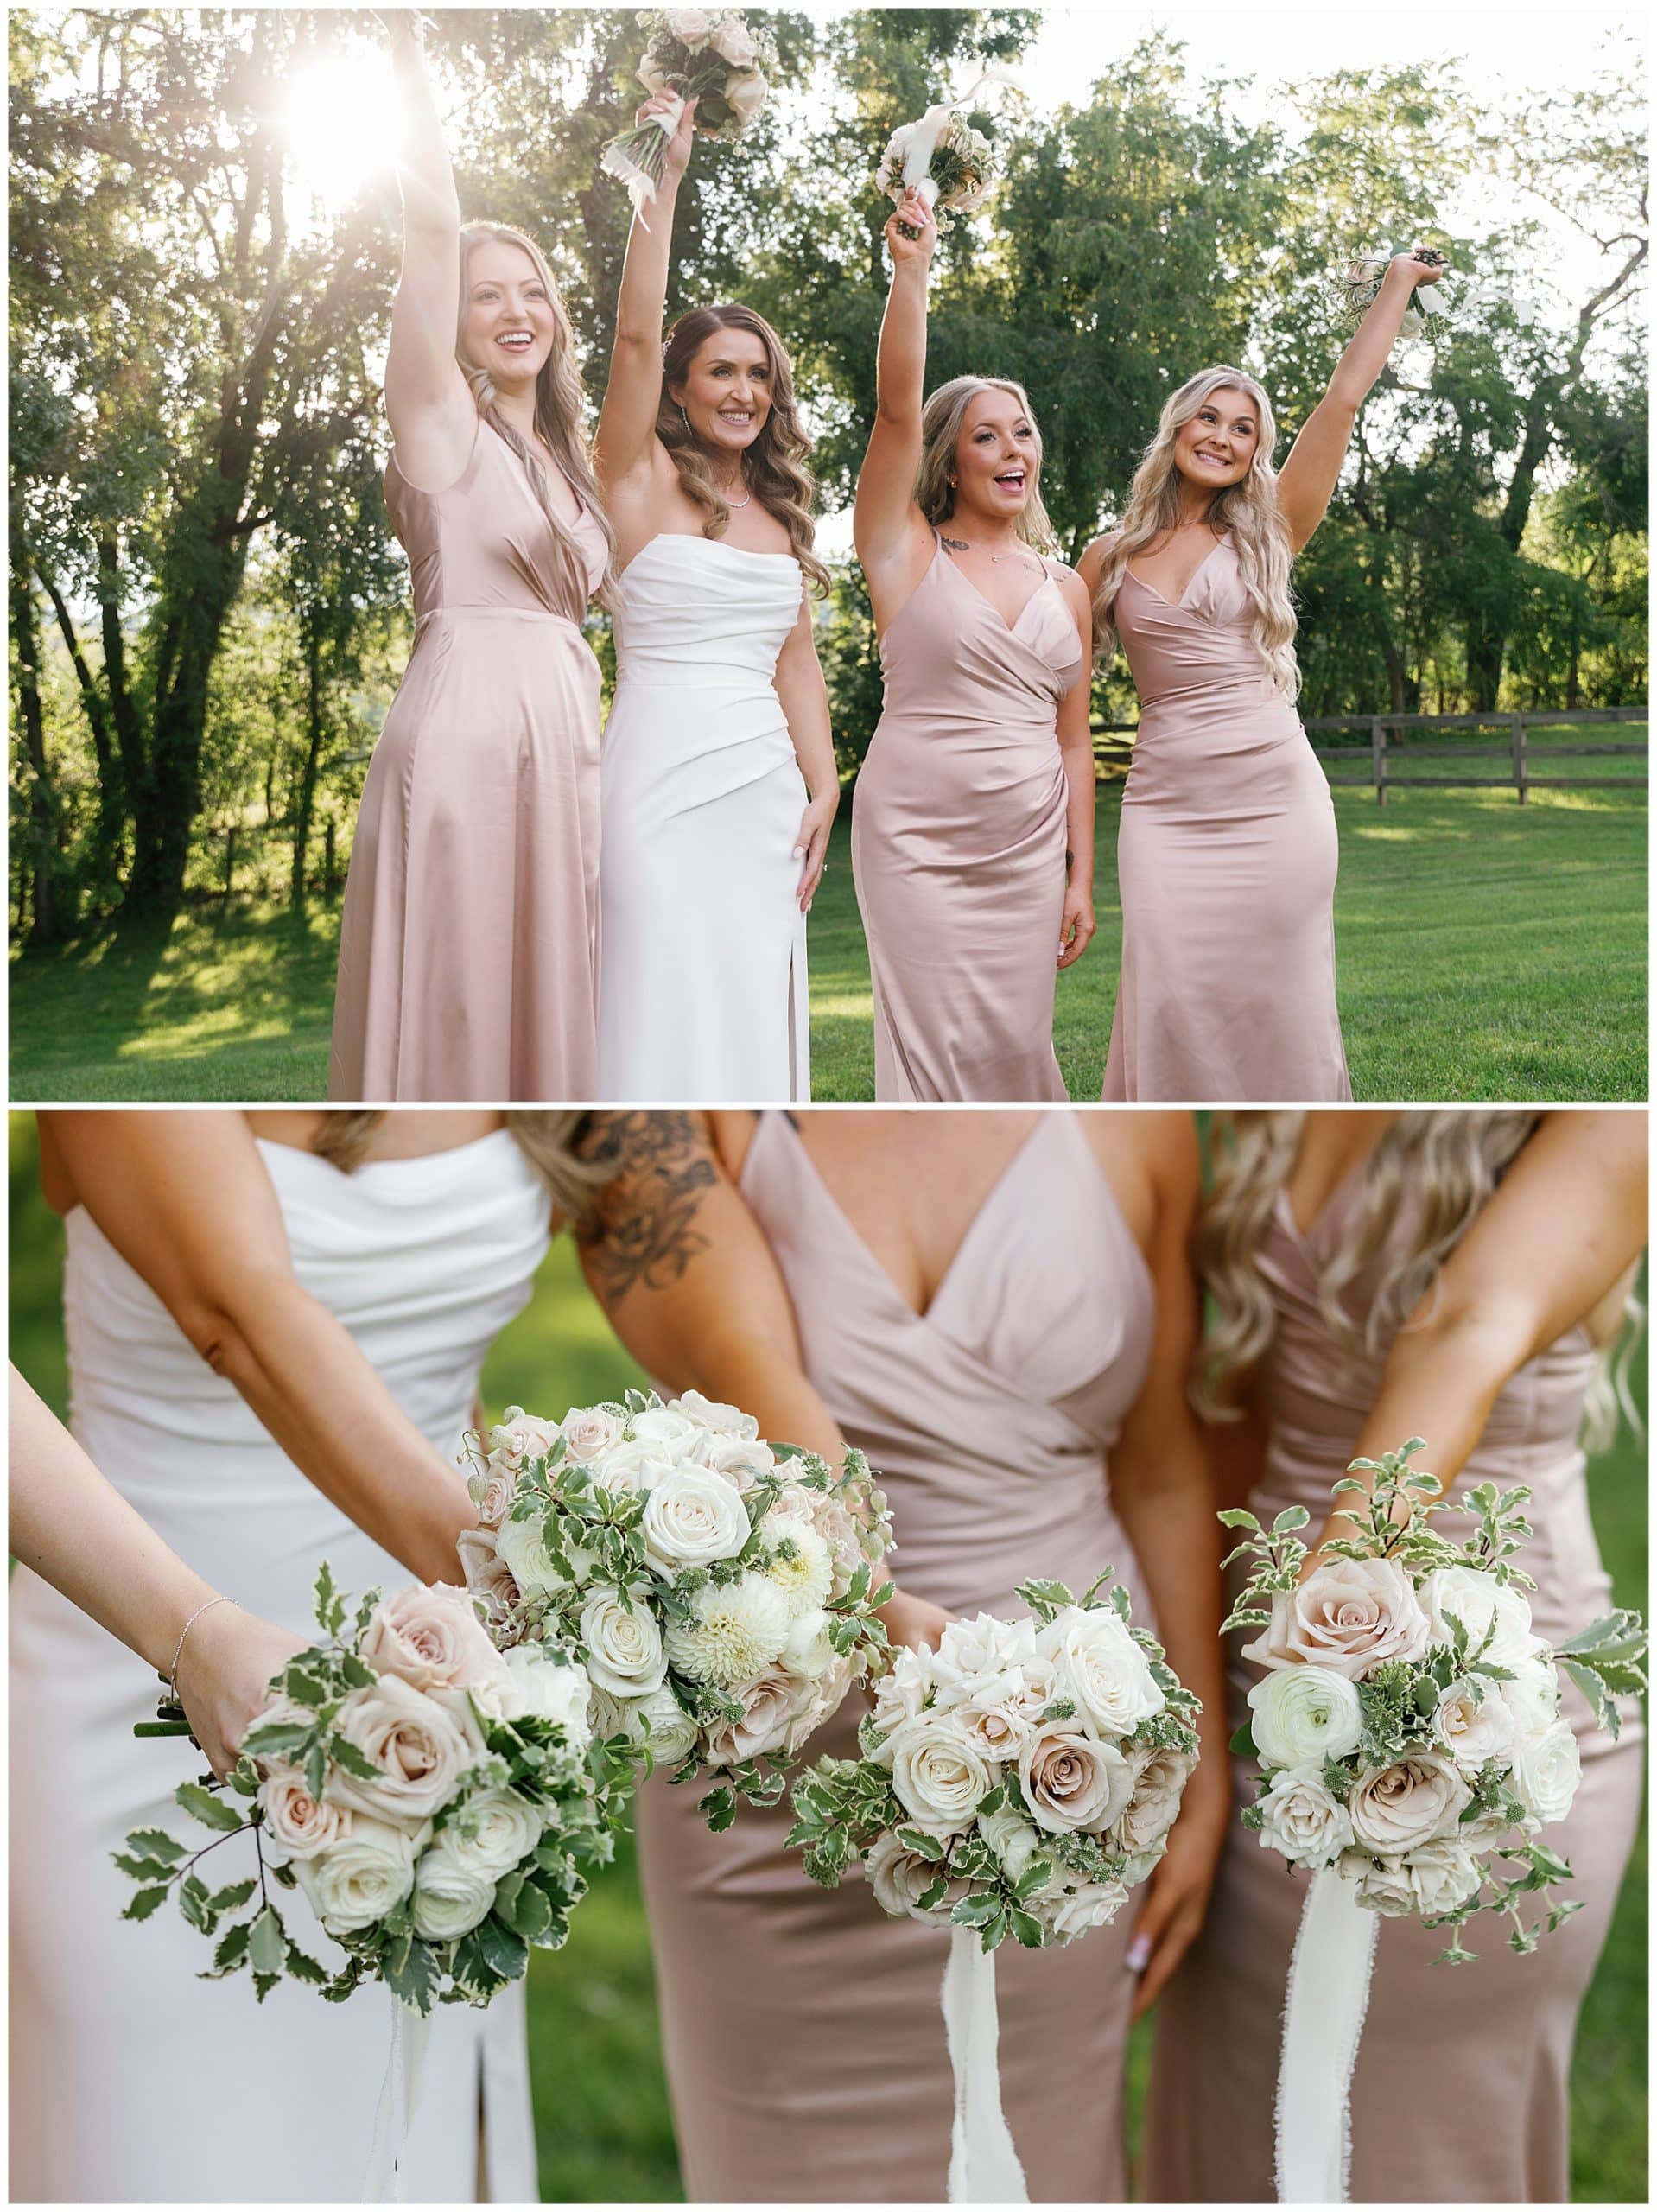 Bridesmaids cheer and show off their bouquests with soft pink and champagne colored roses